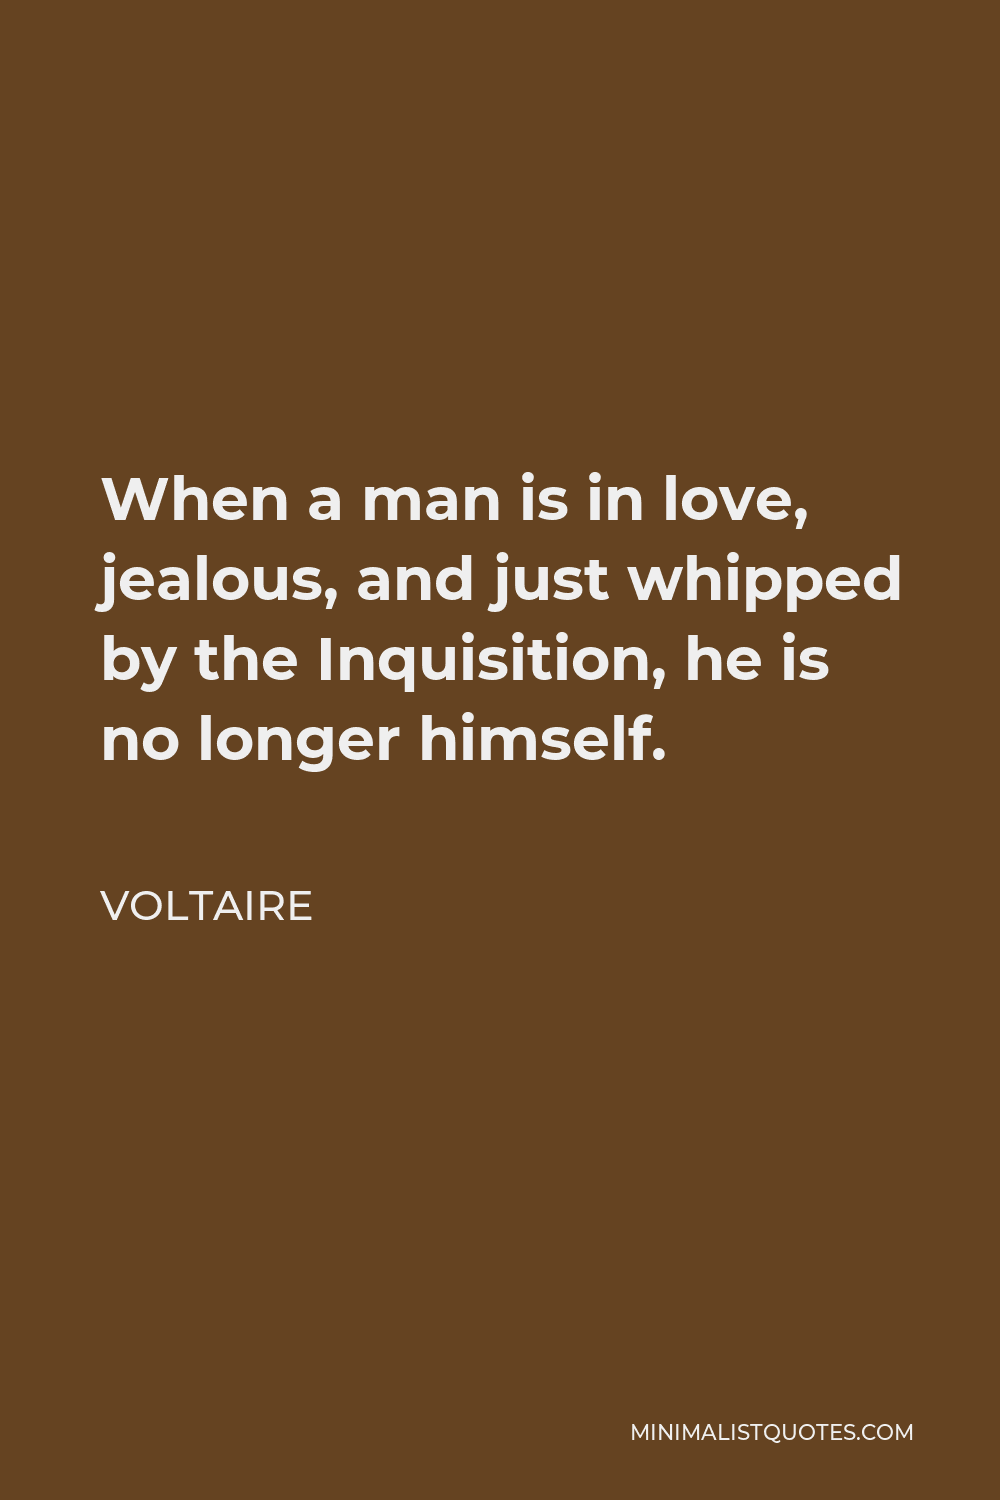 Voltaire Quote - When a man is in love, jealous, and just whipped by the Inquisition, he is no longer himself.